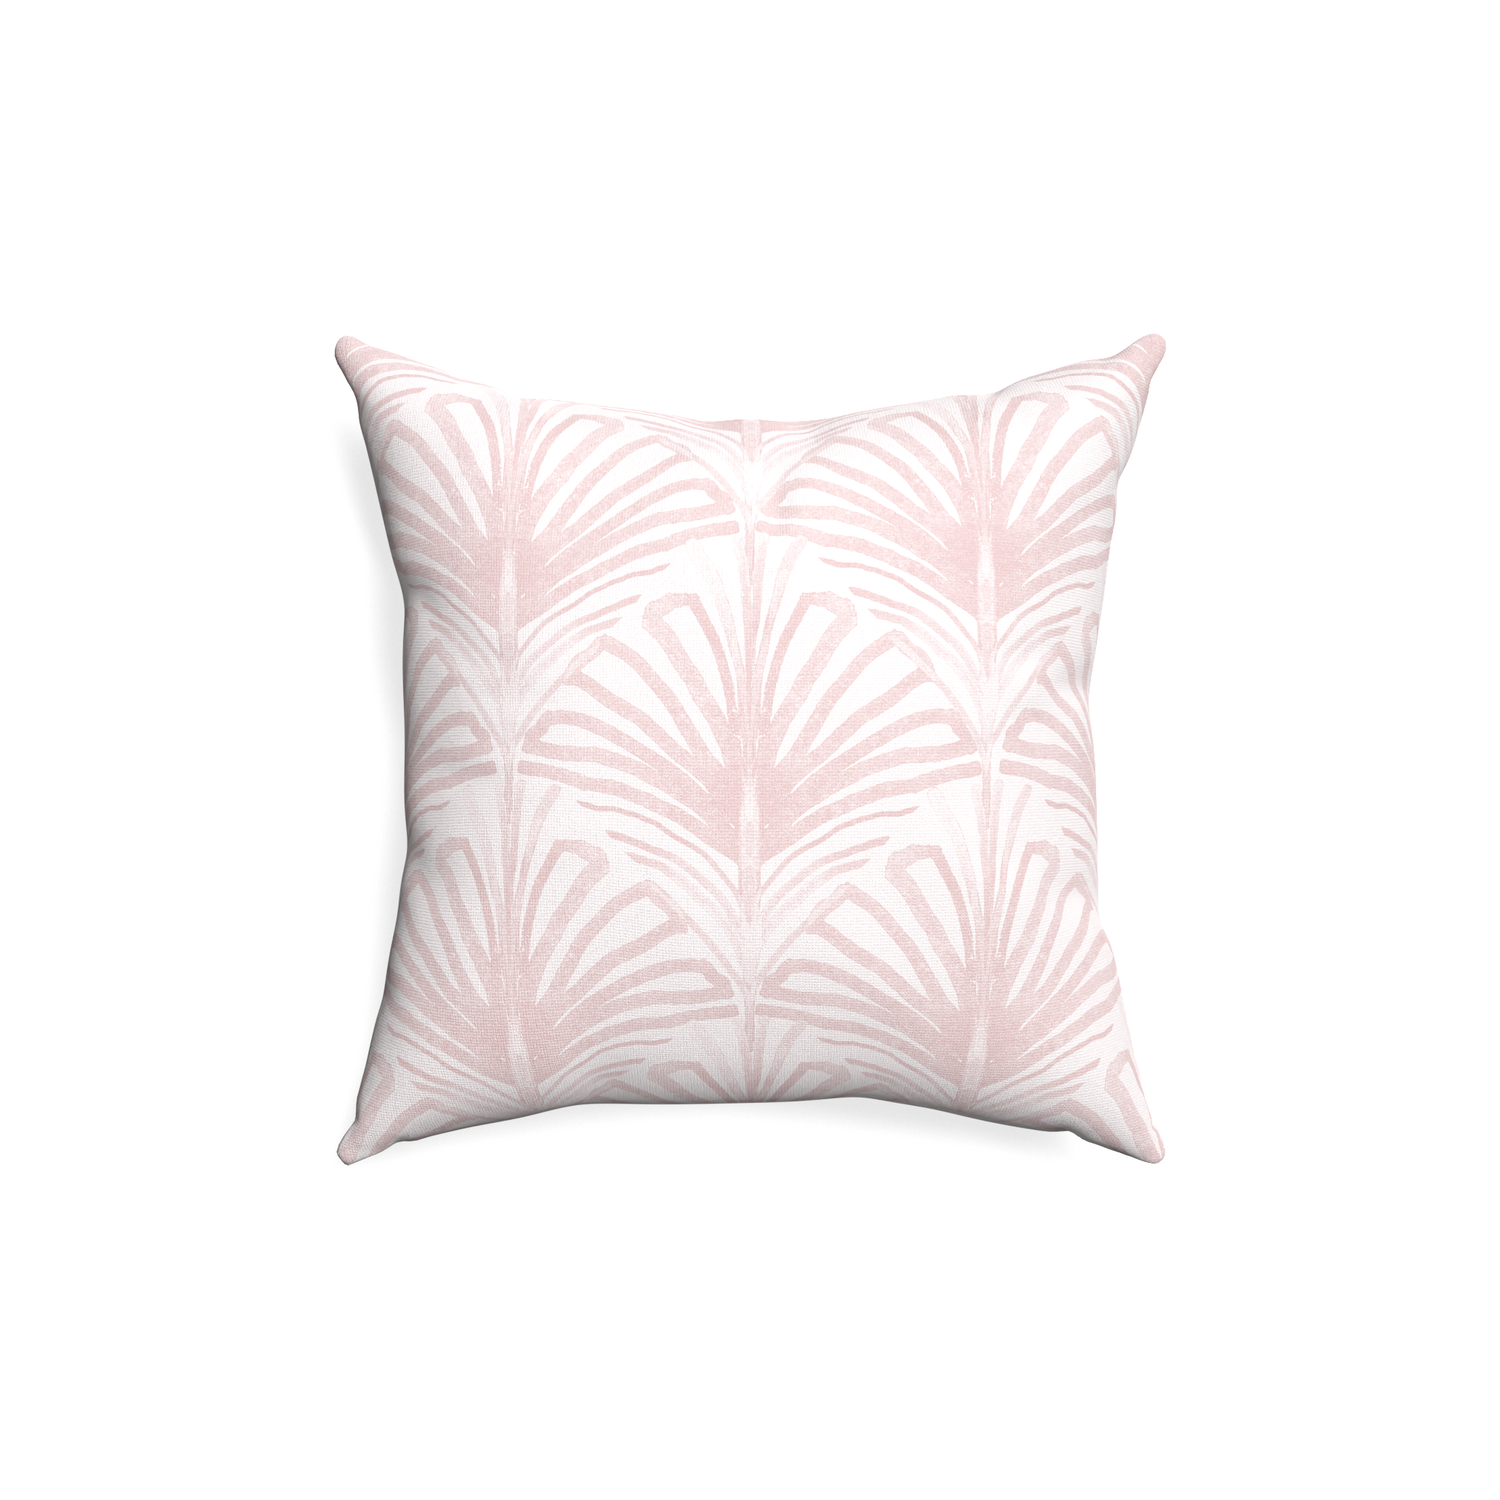 18-square suzy rose custom pillow with none on white background